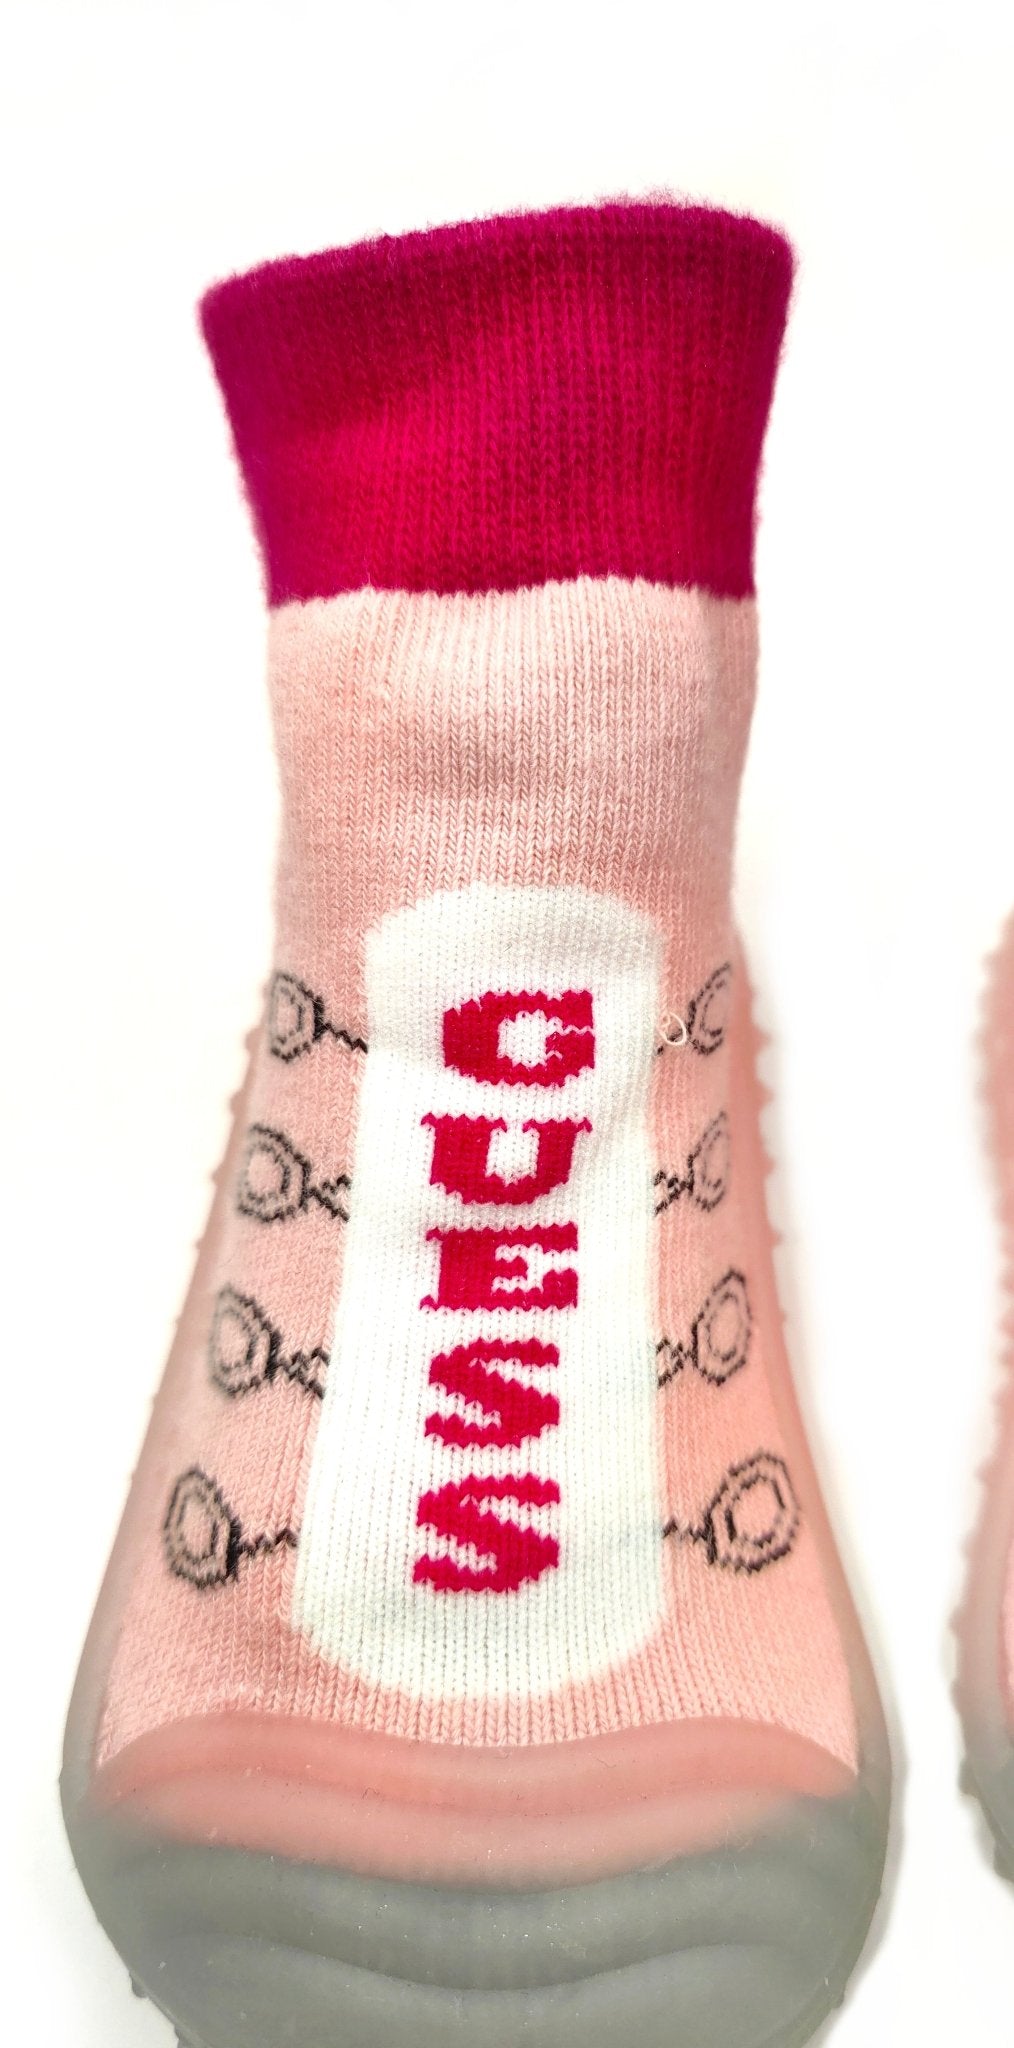 Guess Who PINK by Bearba- Sock Shoes for Babies & Toddlers Sizes- XS,S,M Flexible Soles, Lightweight, Machine Washable - Bearba